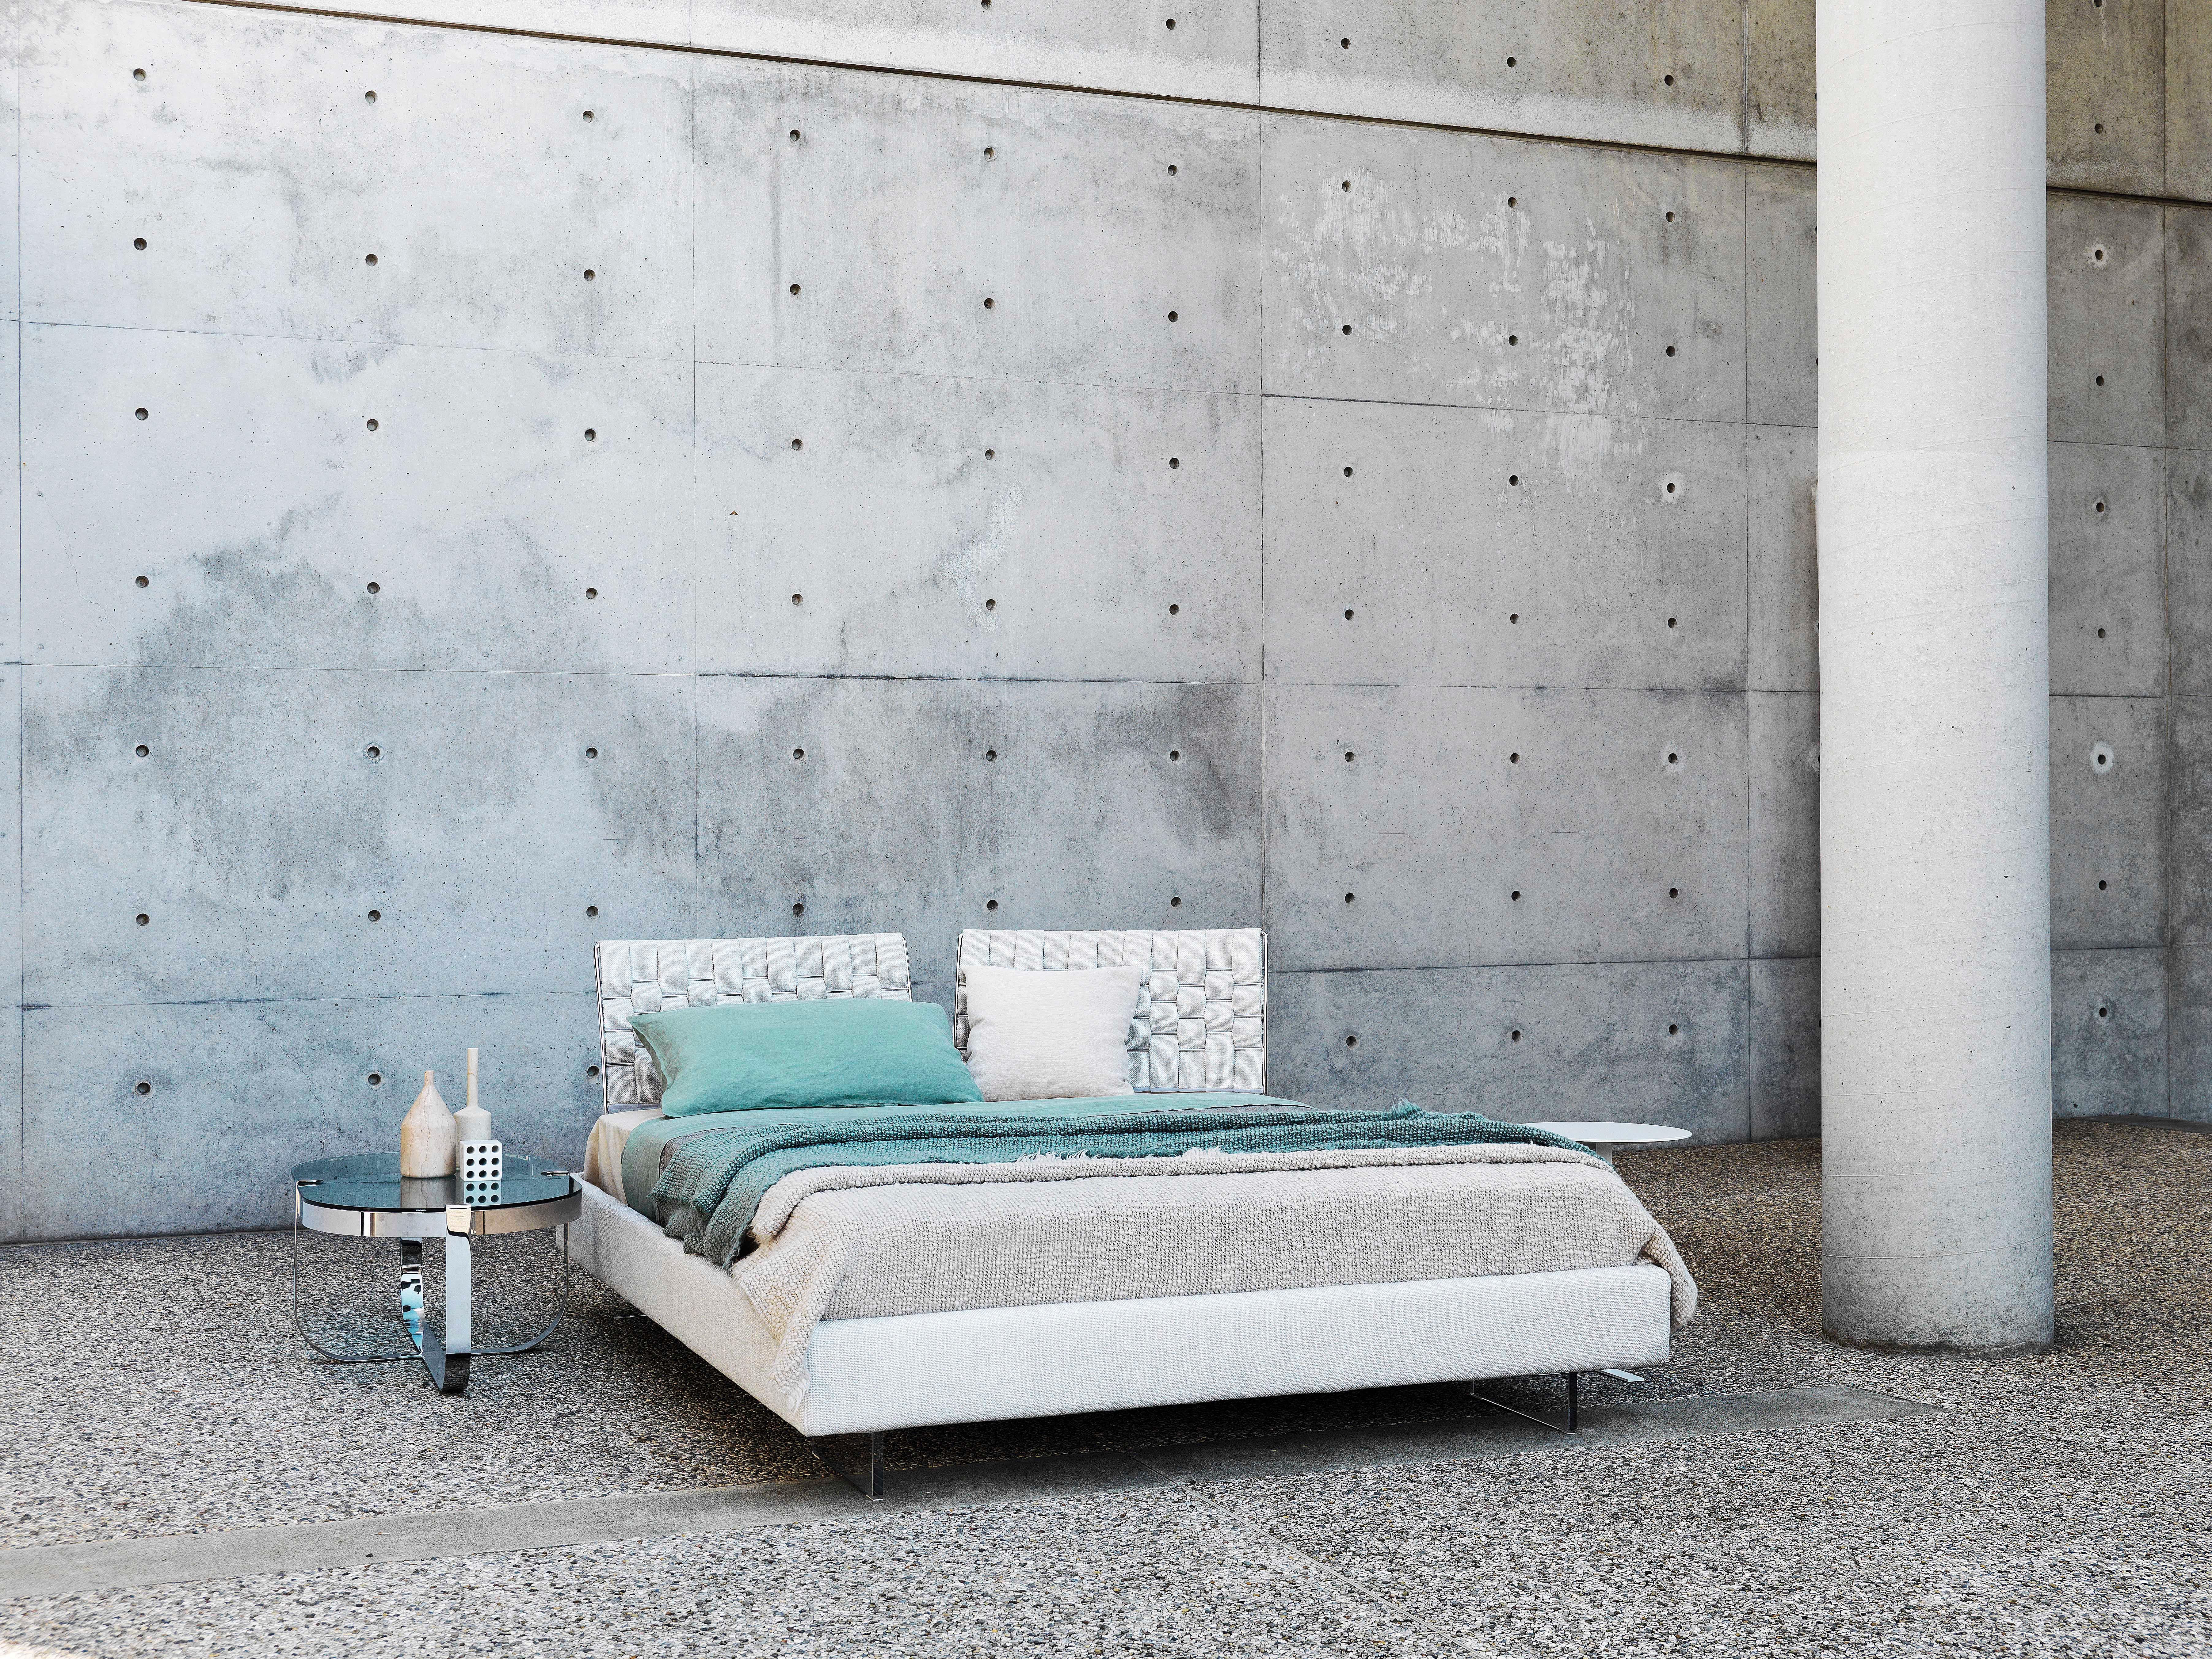 Limes Large is the most generous option within the Limes collection, thanks to the two wider sides that allow for a functional and unusual support. The rectangular feet in transparent methacrylate onto which the base is rested, make the bed appear